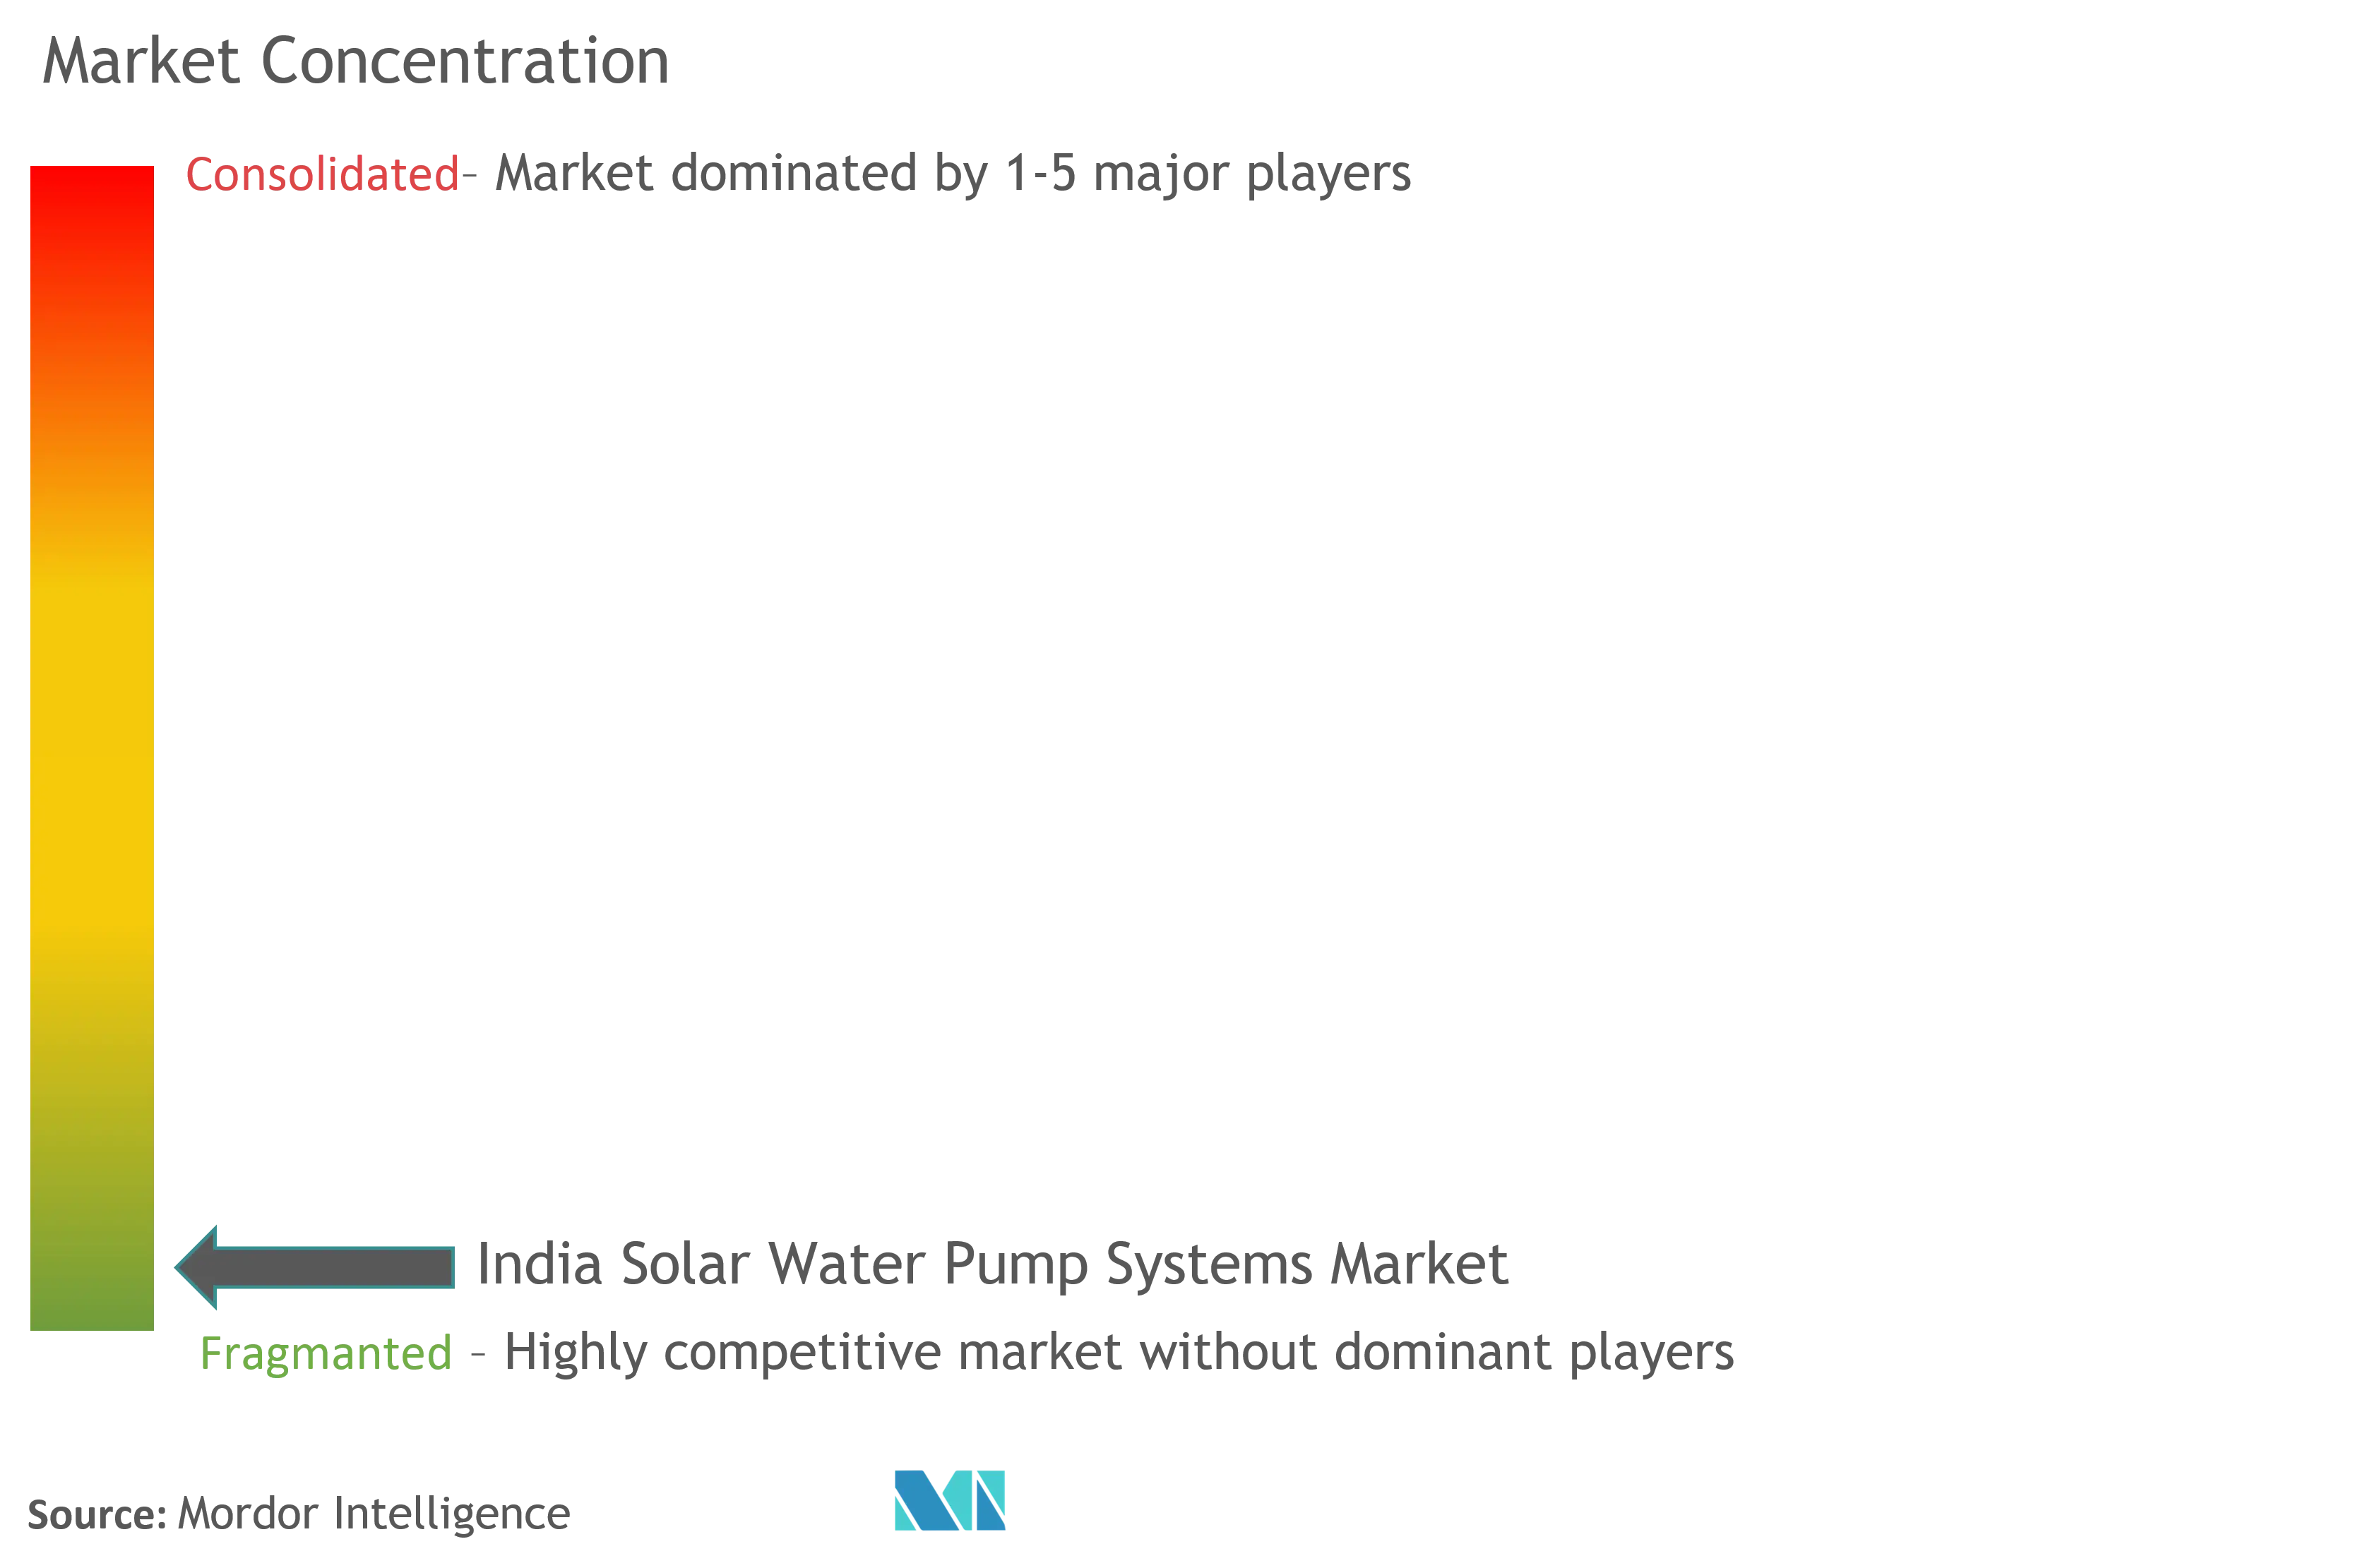 India Solar Water Pump Systems Market Concentration